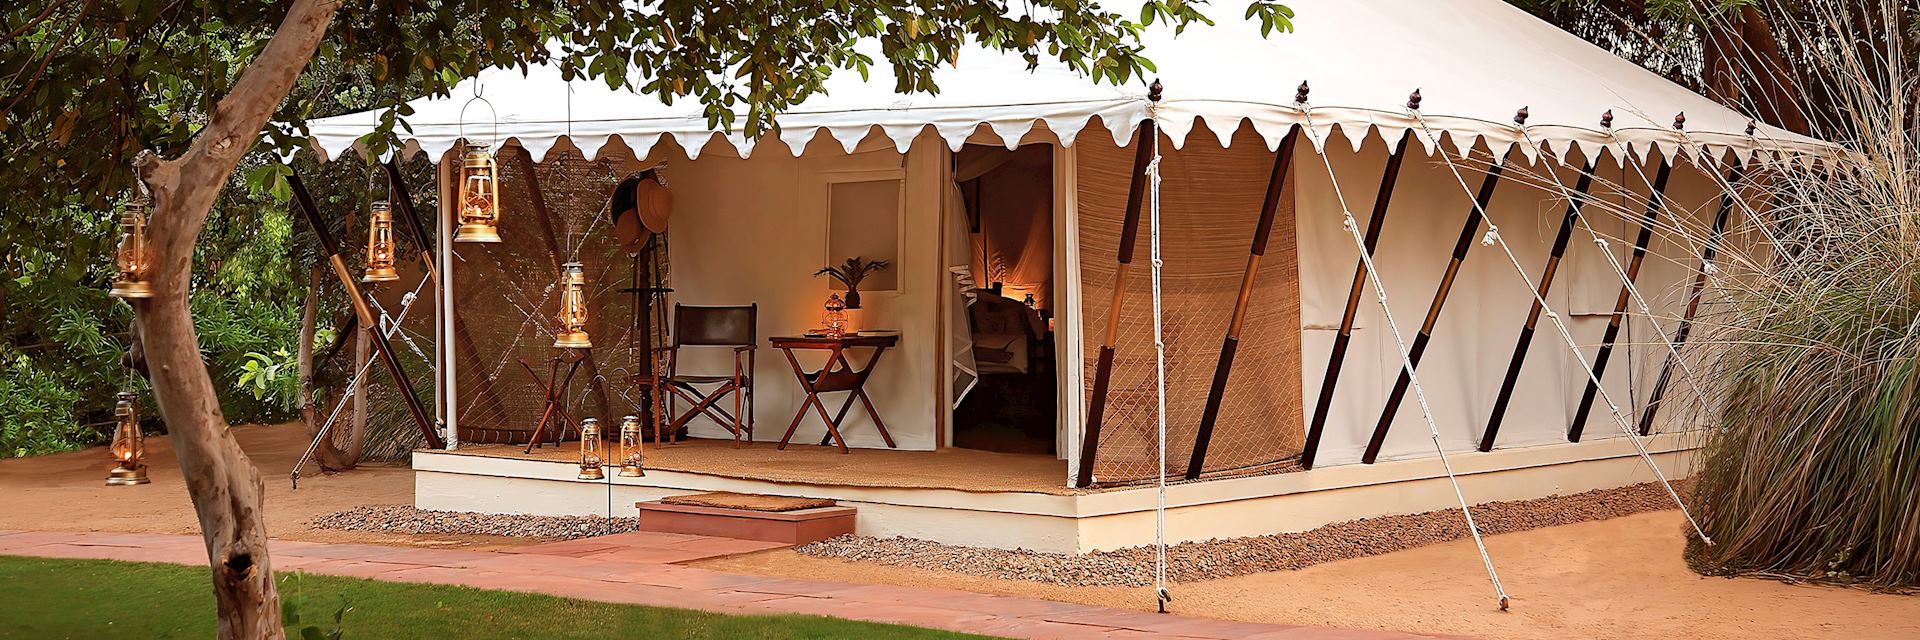 Luxury tent at Sher Bagh